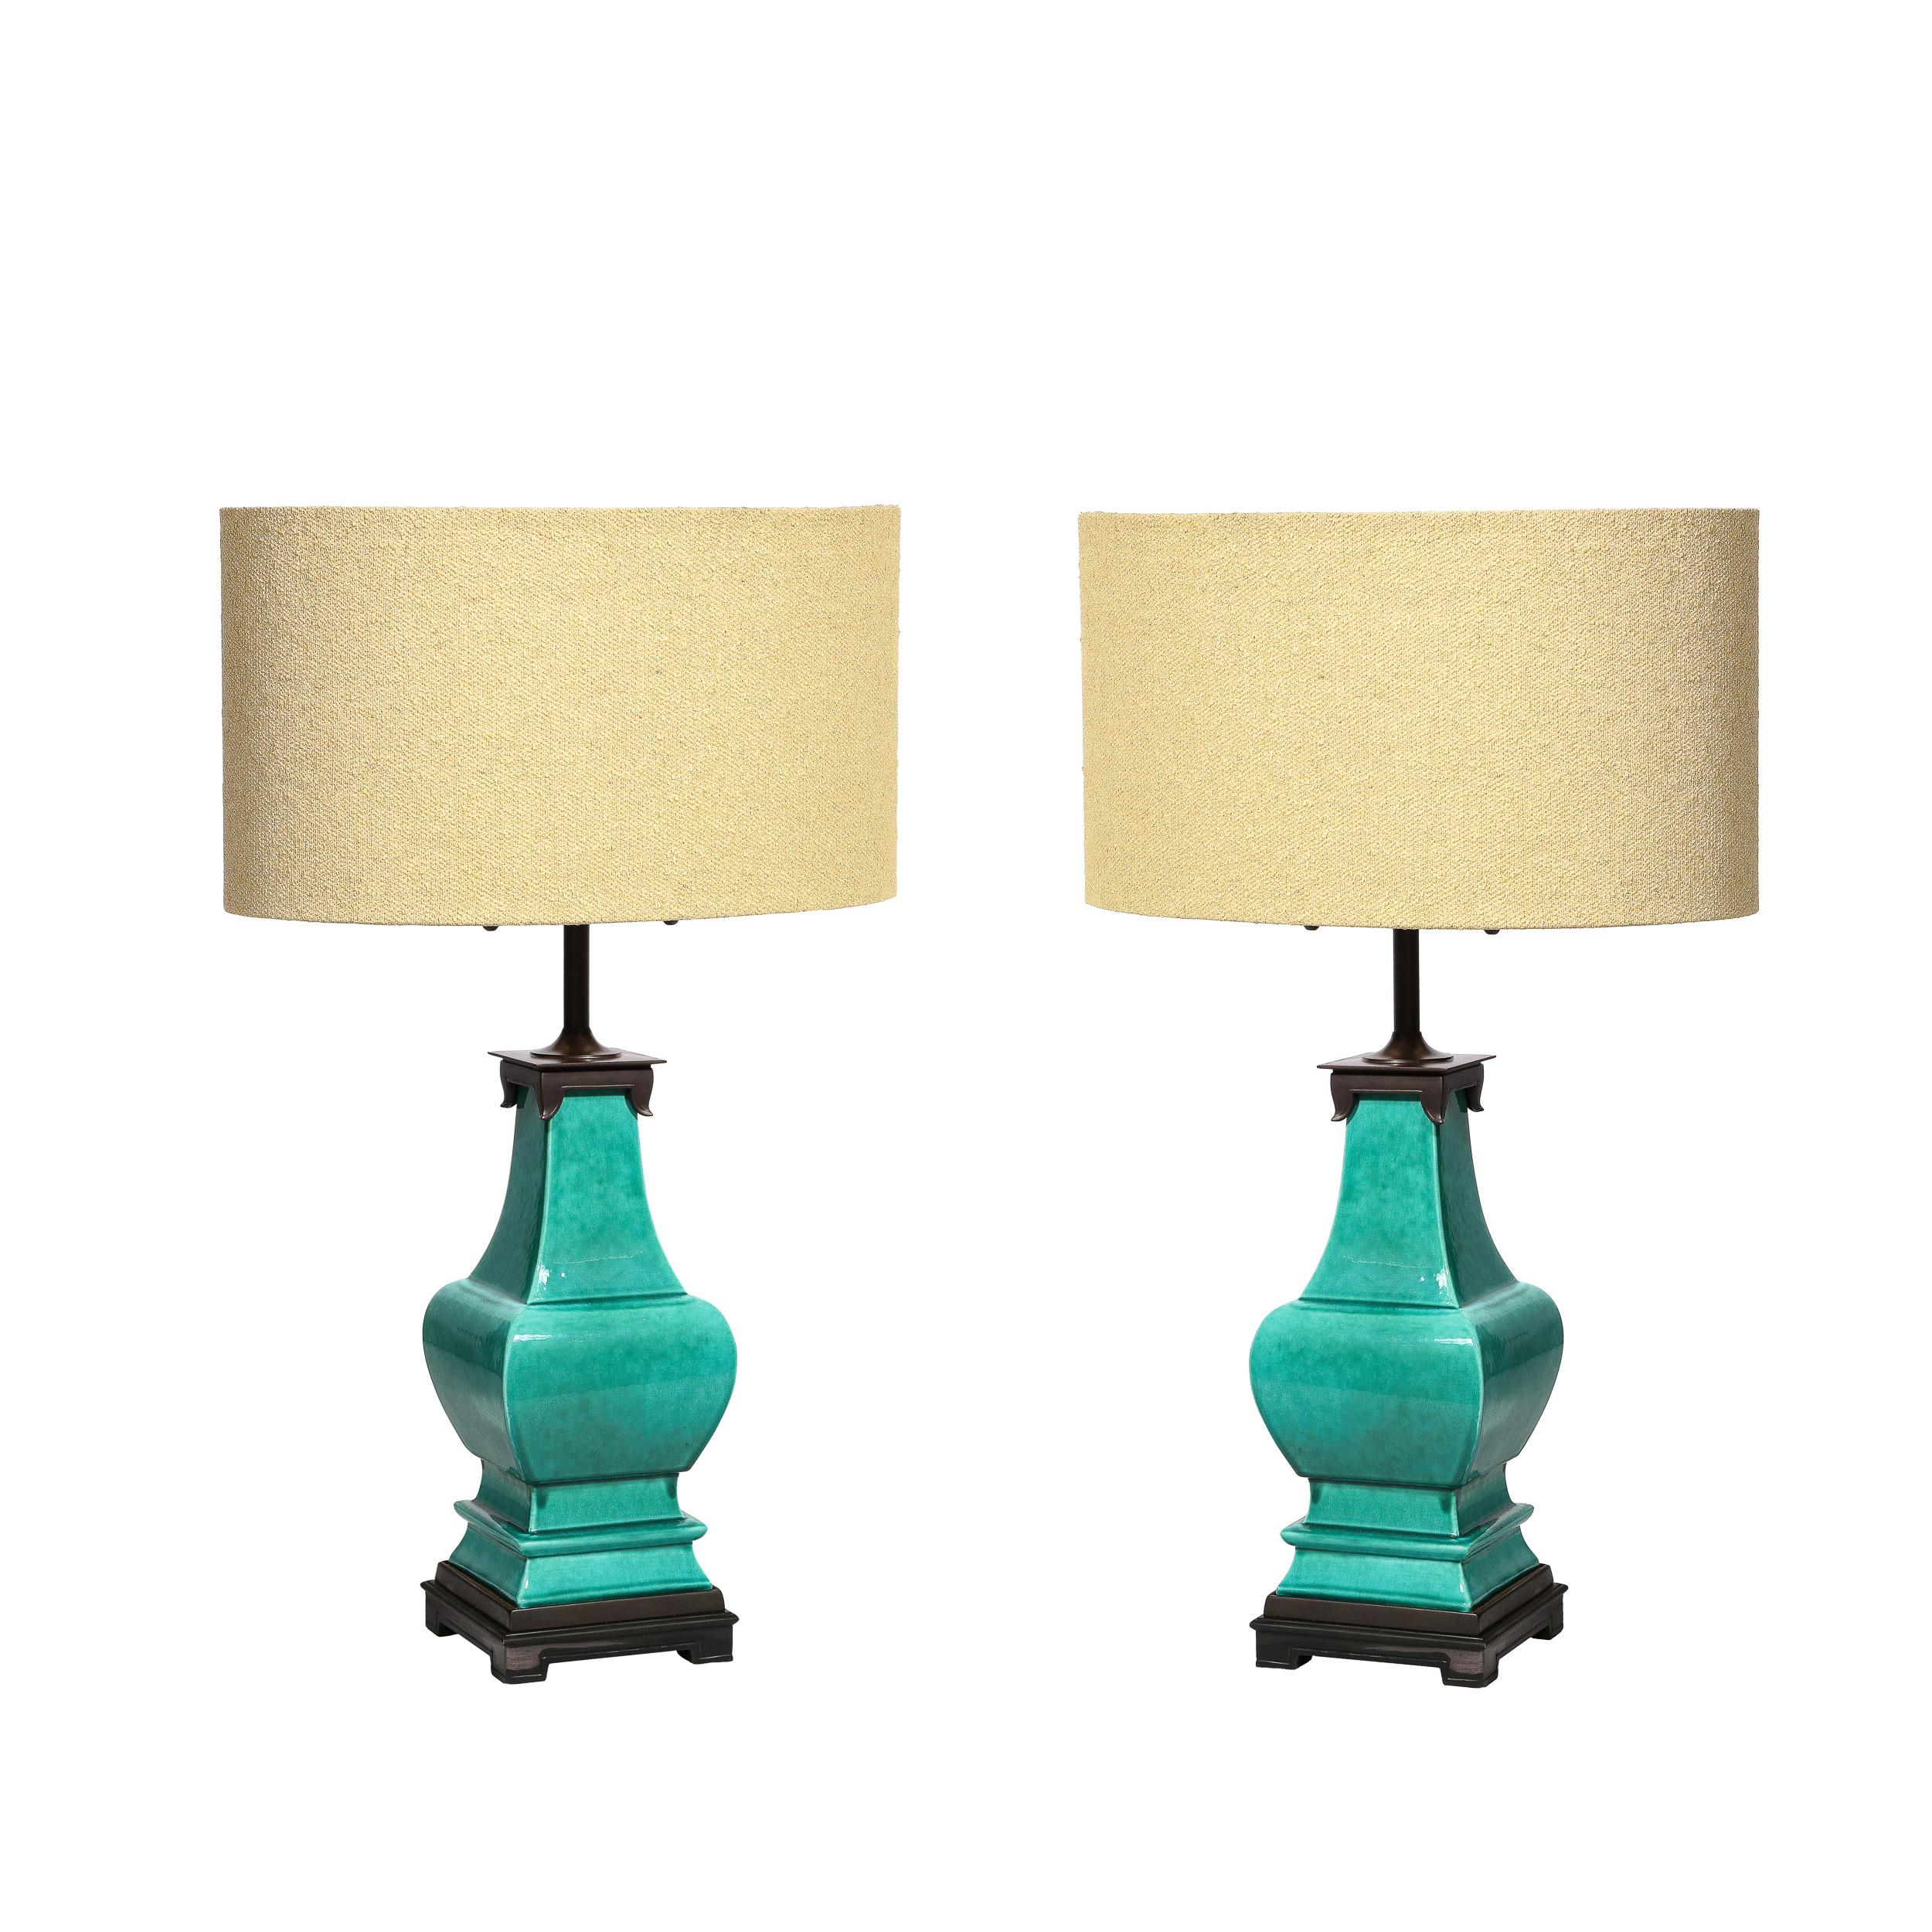 Mid-Century Modernist Ceramic Turquoise Jade Table Lamps w/ Bronze Fittings For Sale